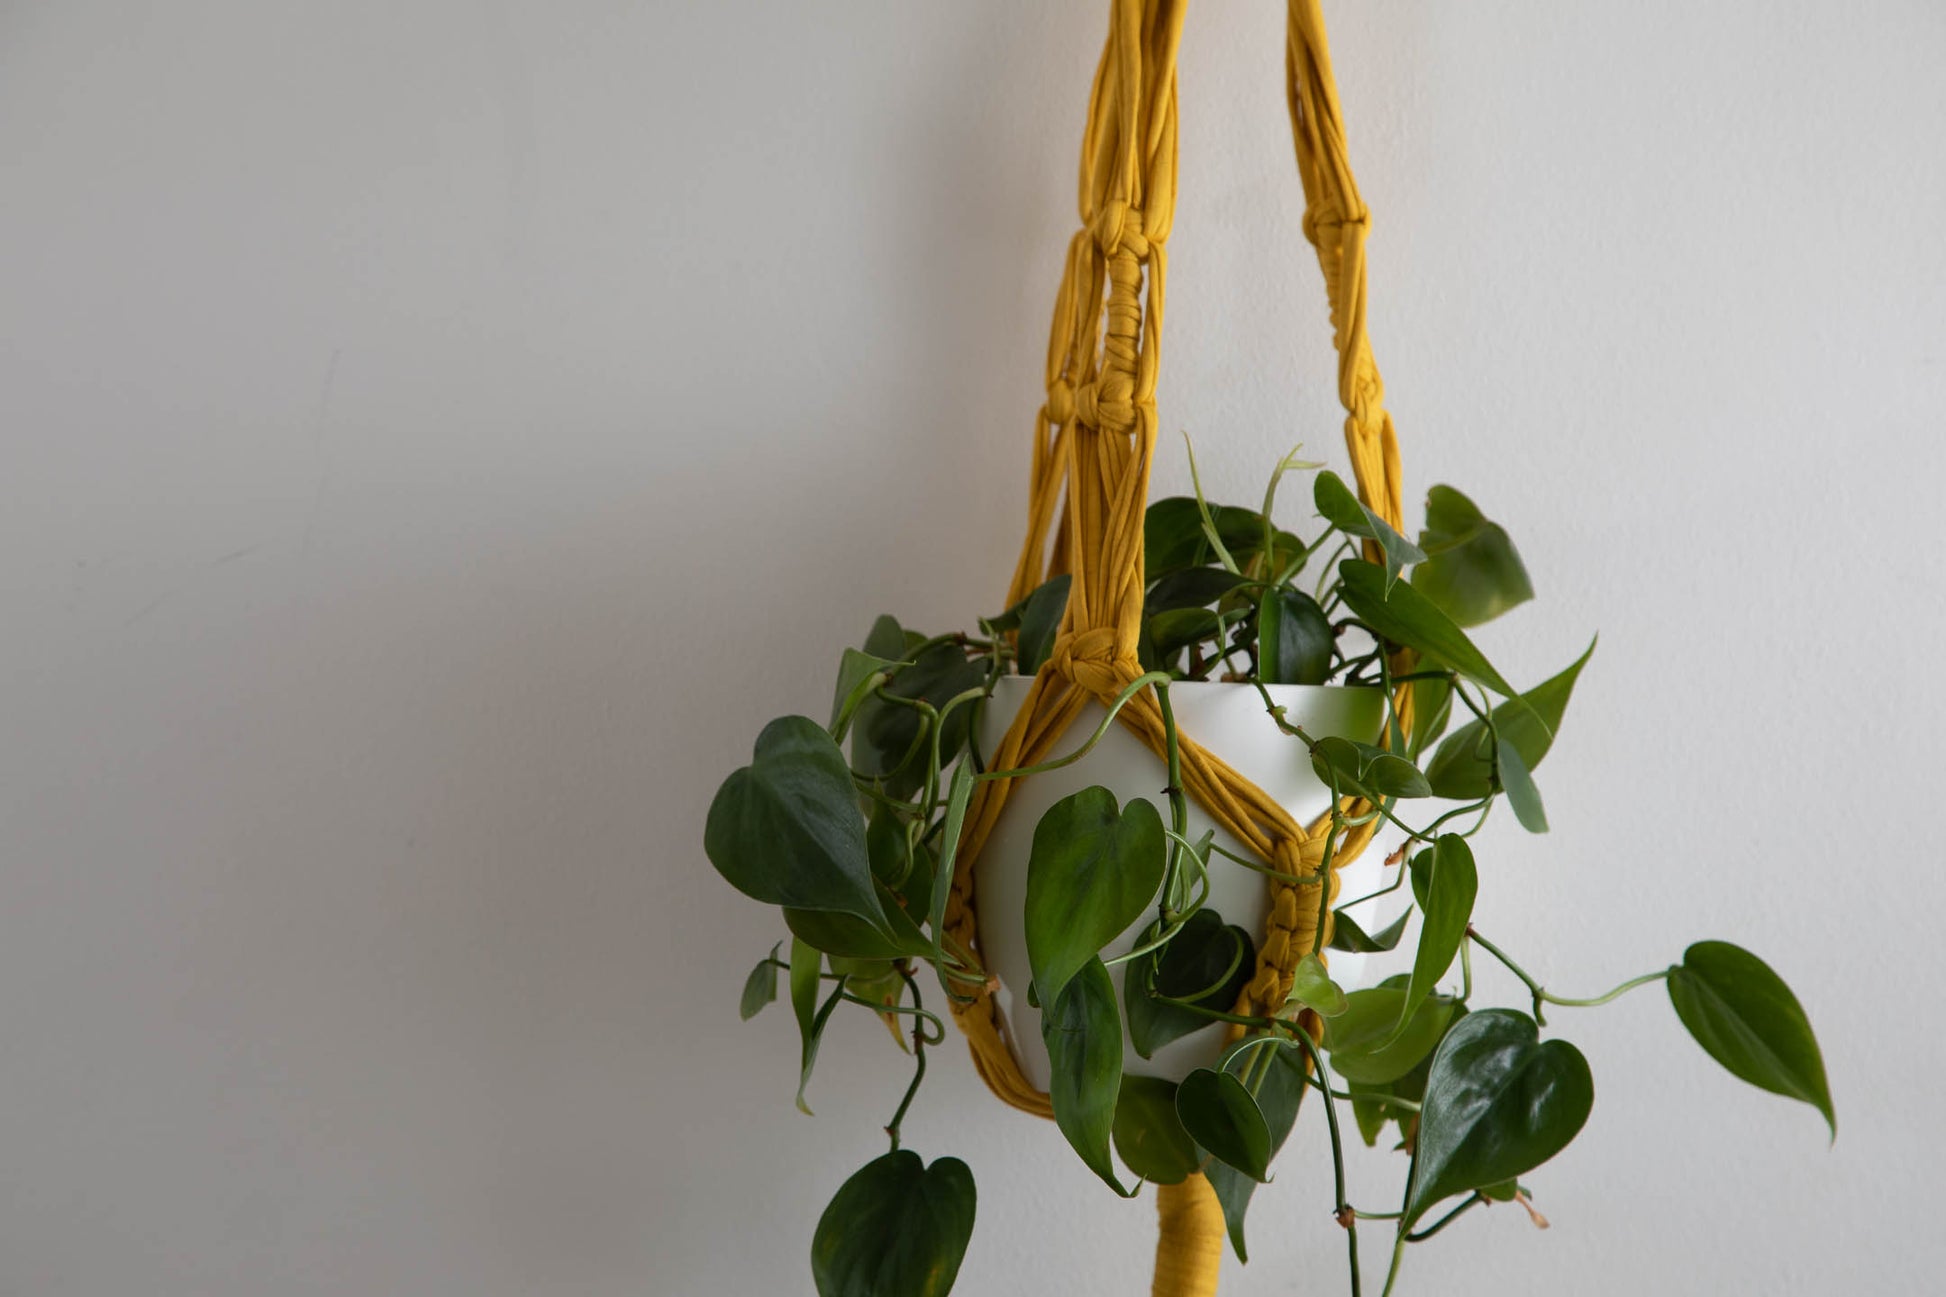 Buy Online Premium Quality and Beautiful Giant Macrame Plant Hanger - Hotpinkhangers